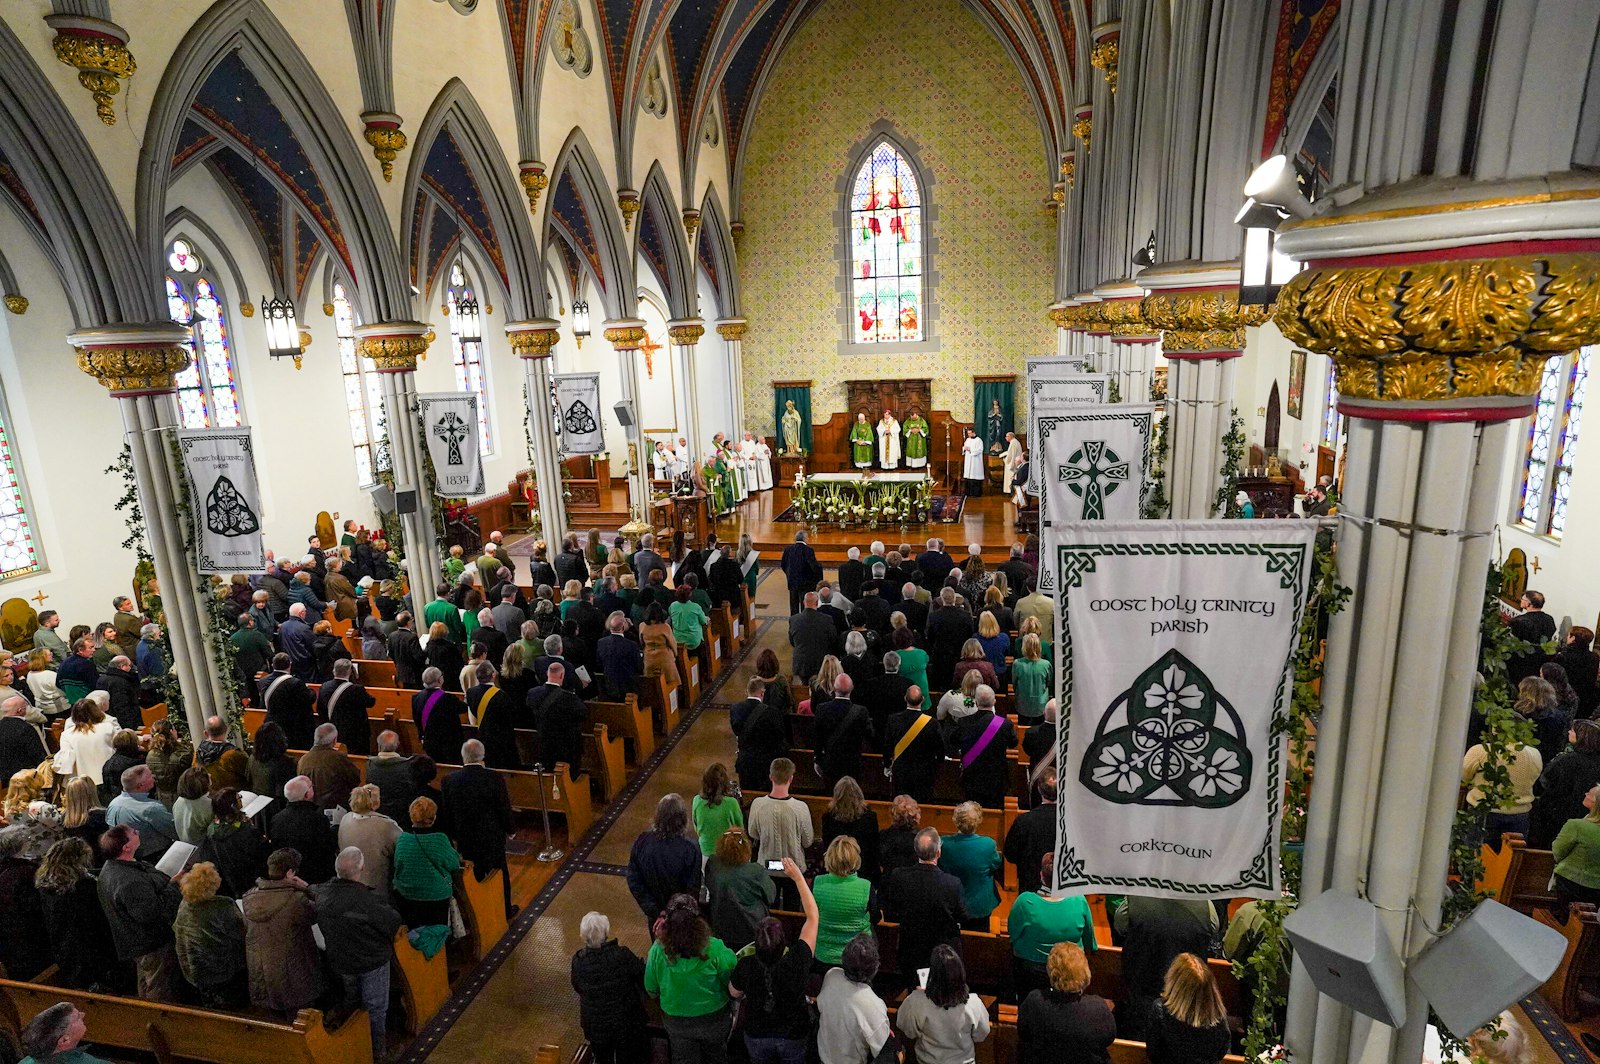 A sea of green in attendance at the St. Patrick's Day Mass. Like St. Patrick, it falls on today's Christians to evangelize and unleash the Gospel so people can know who Jesus is, Fr. Livingston said.